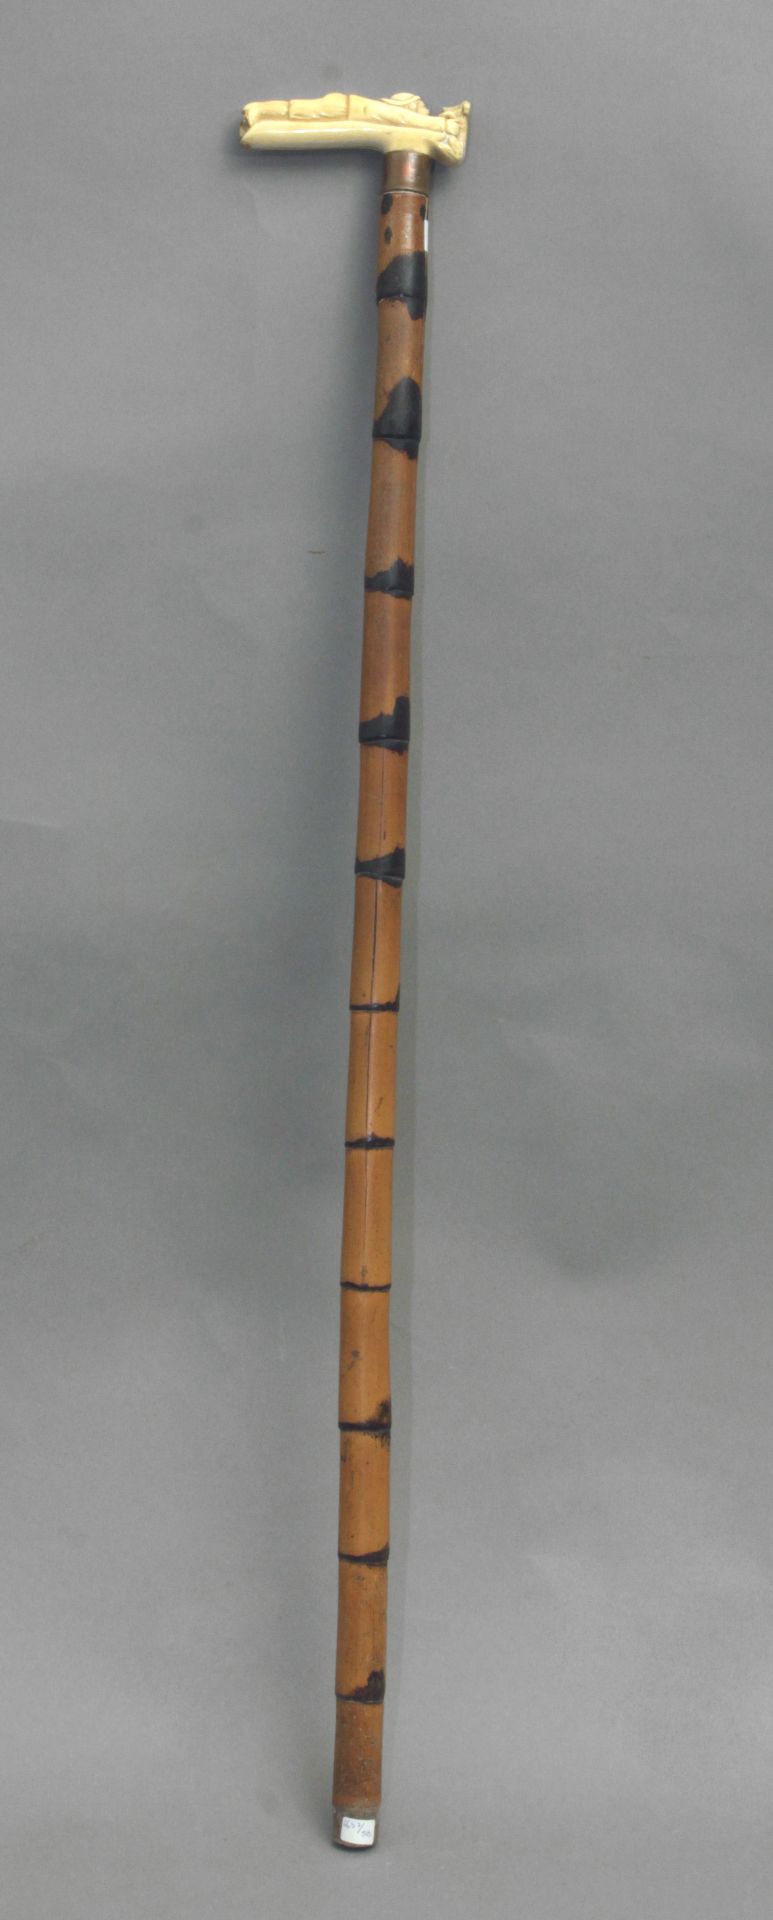 An ivory handled walking cane, Central Europe, 19th century - Image 3 of 8